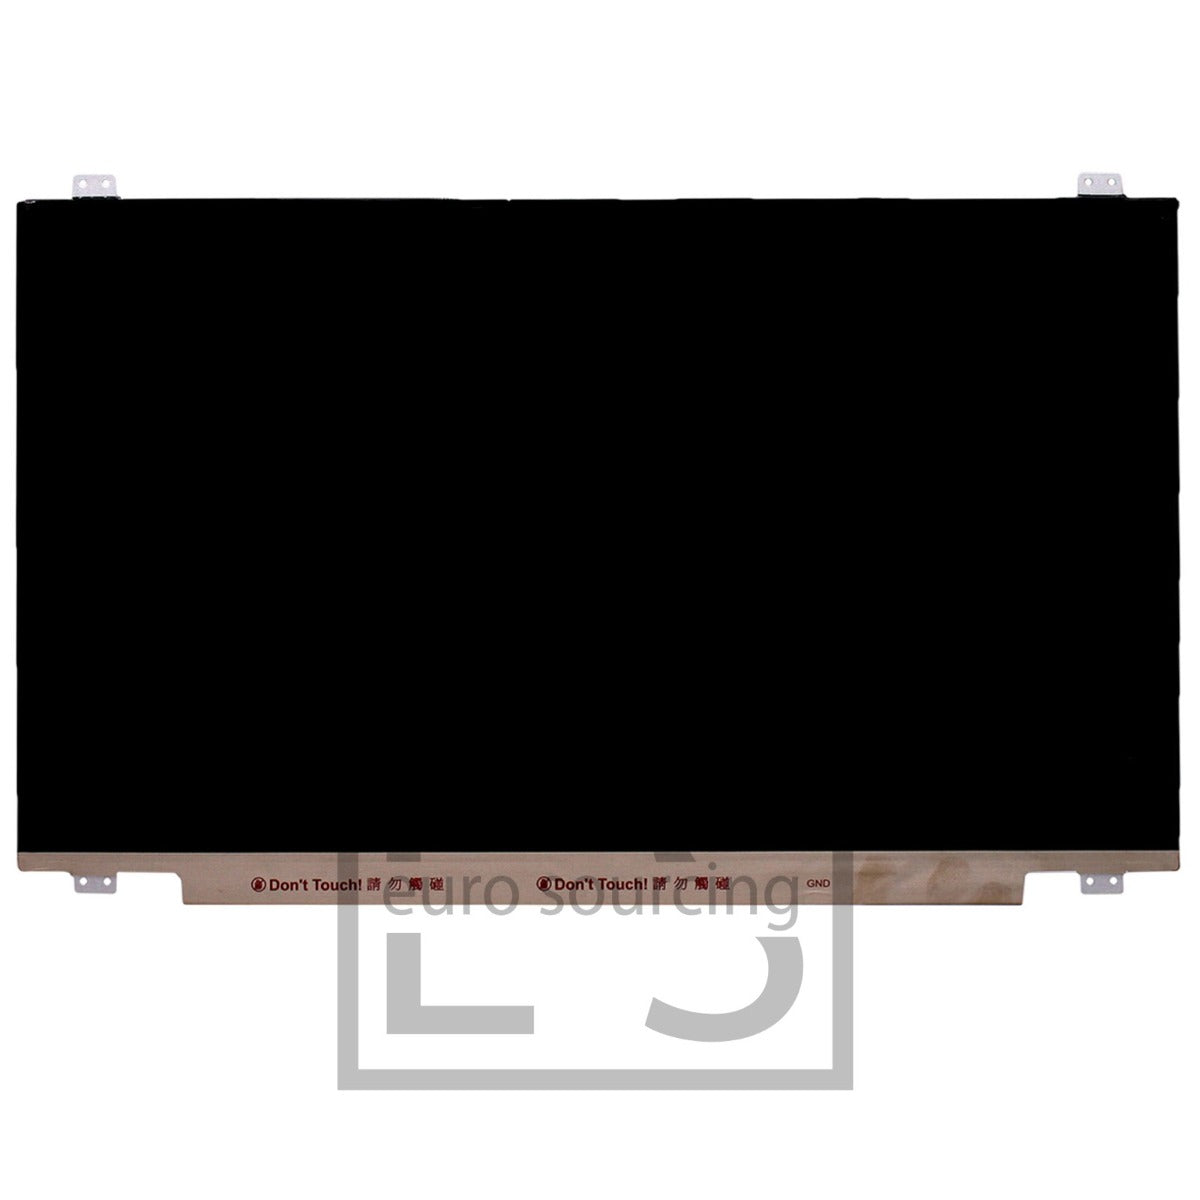 Replacement For B173RTN02.1 17.3" LED SLIM 30 PIN EDP WXGA++ Matte Screen Display Panel Compatible With DELL PRECISION 17 7730